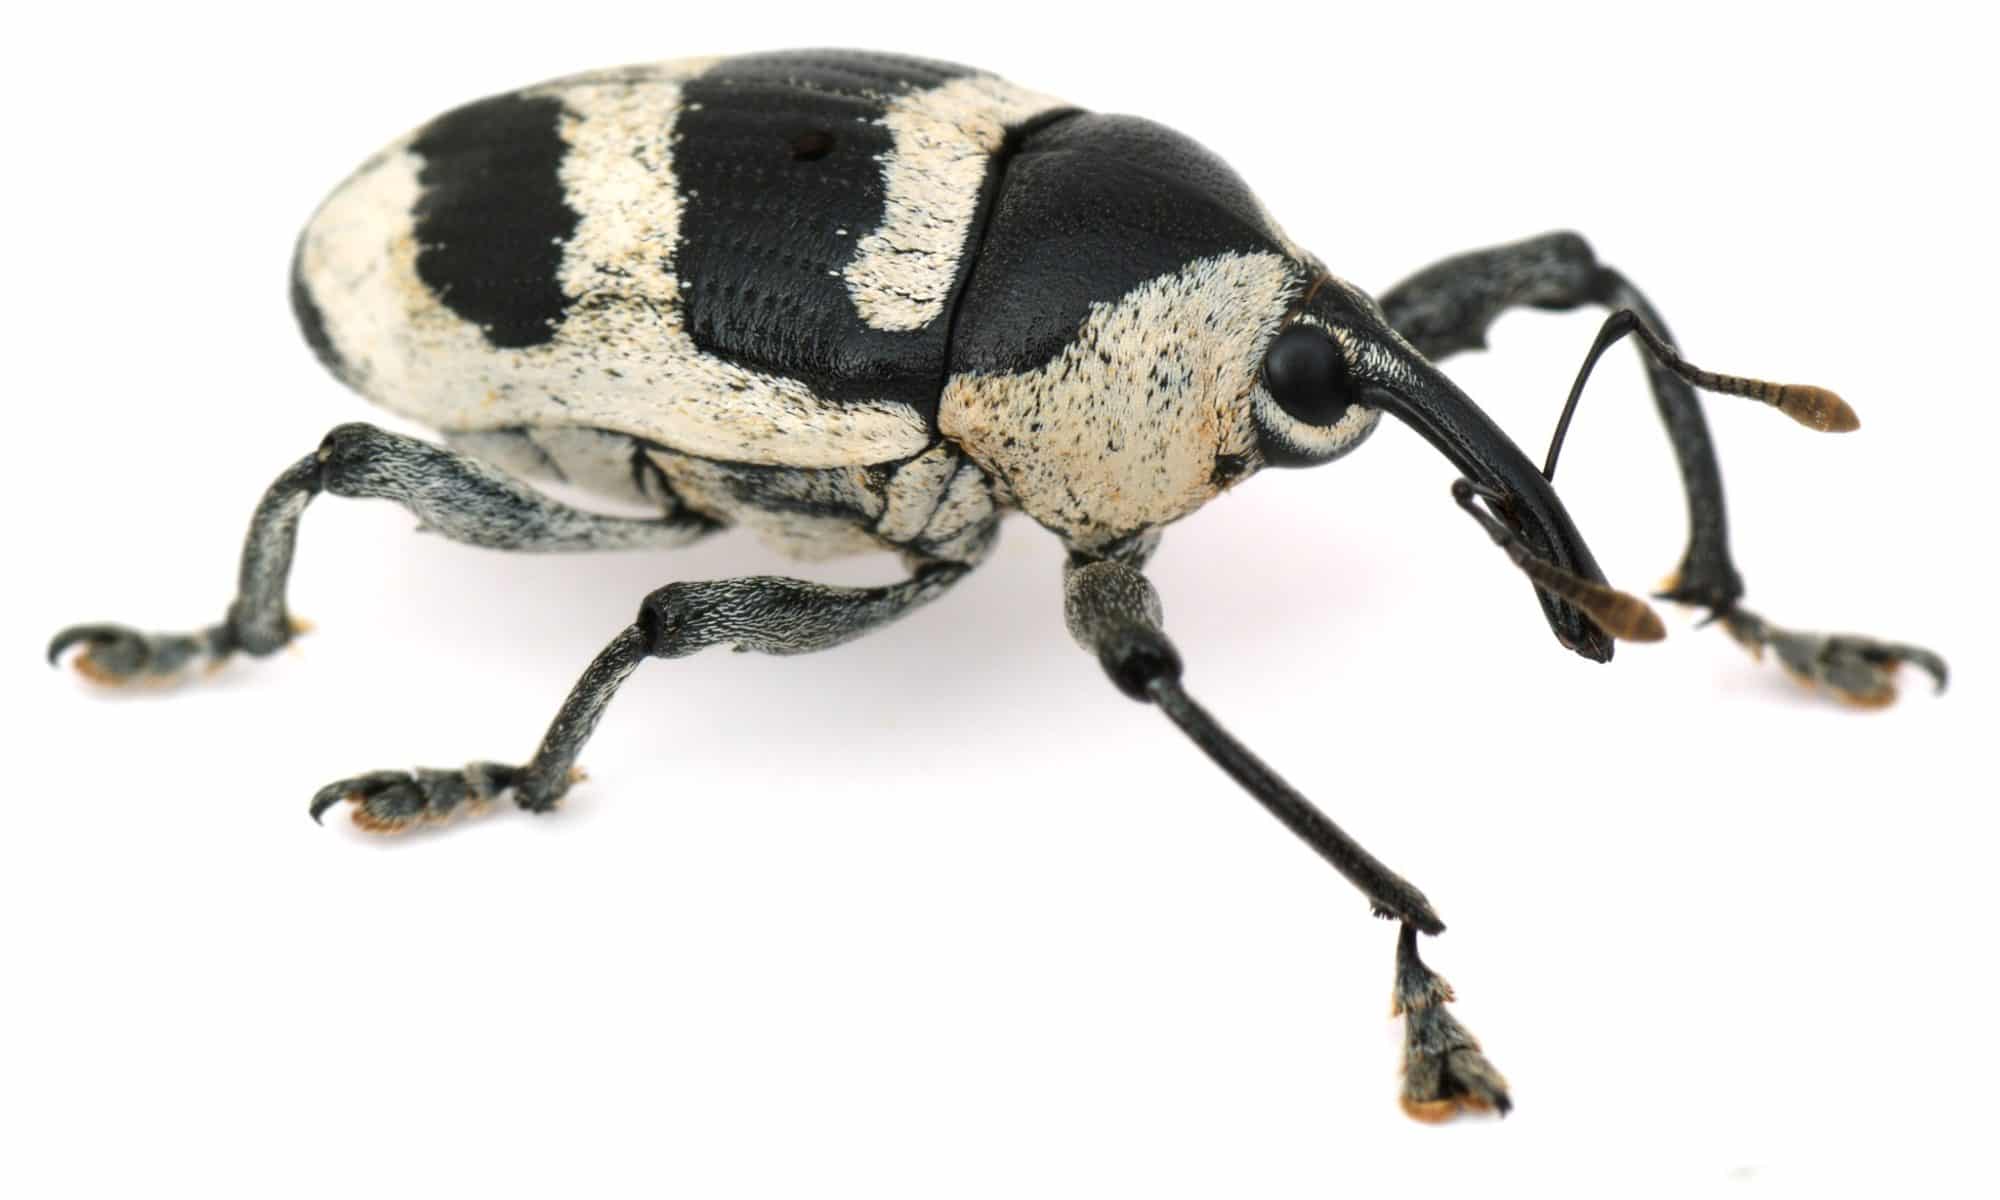 A black and white Weevil on a white background